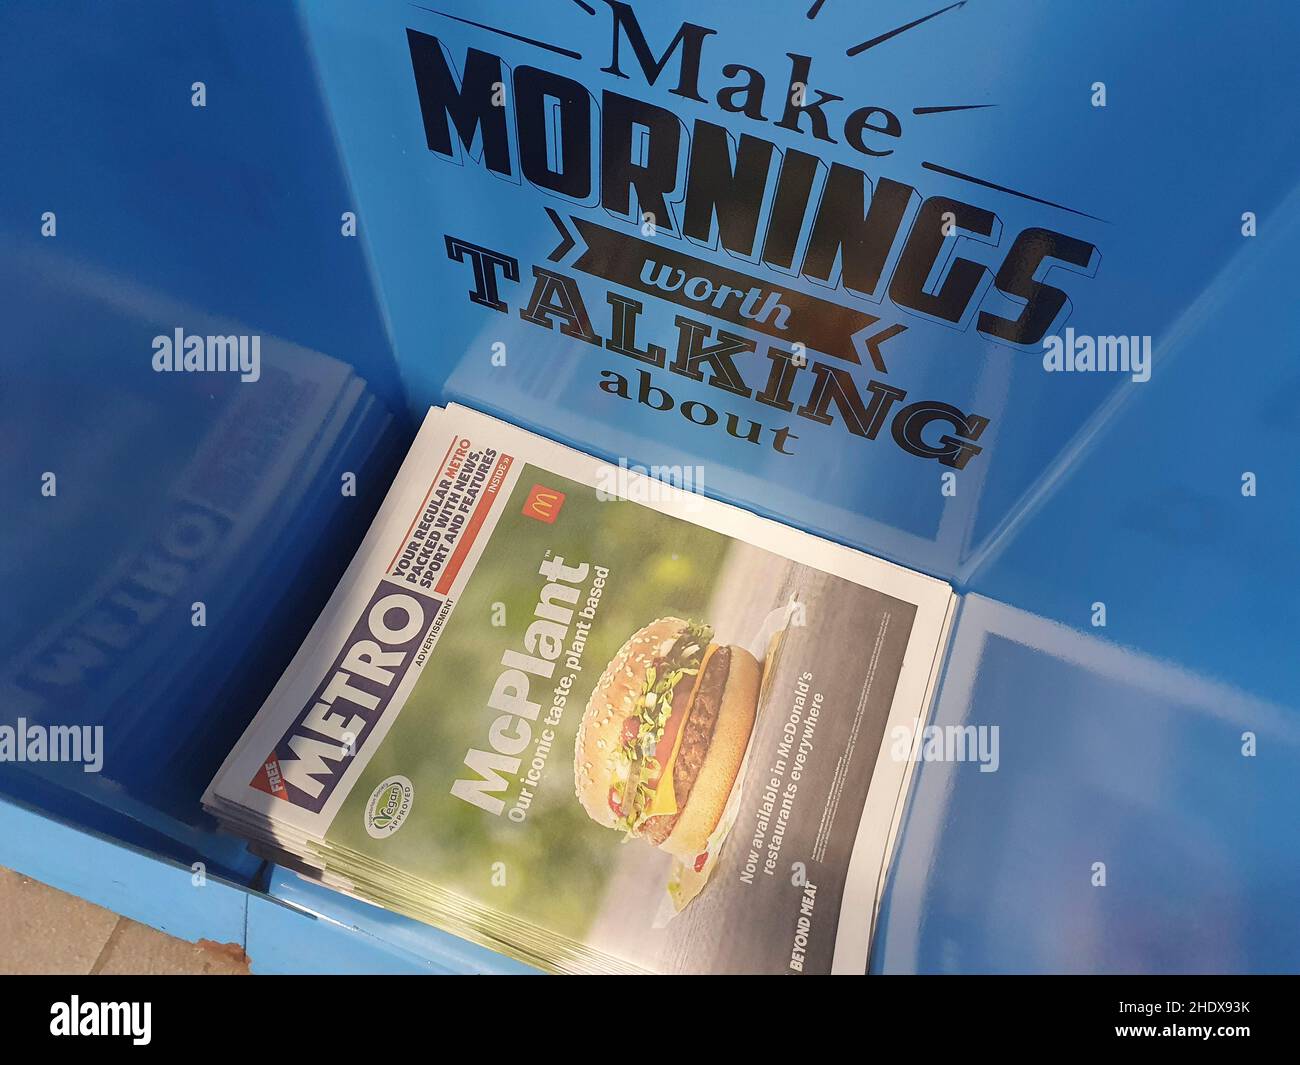 London, UK, 5 January 2021: McDonald's have paid for their McPlant advert to be wrapped around the Metro free newspaper for morning commuters. The vegan burger is being offered for Veganuary, a popular scheme which encourages people to give up animal products for one month for both personal health and the good of the planet. Anna Watson/Alamy Stock Photo